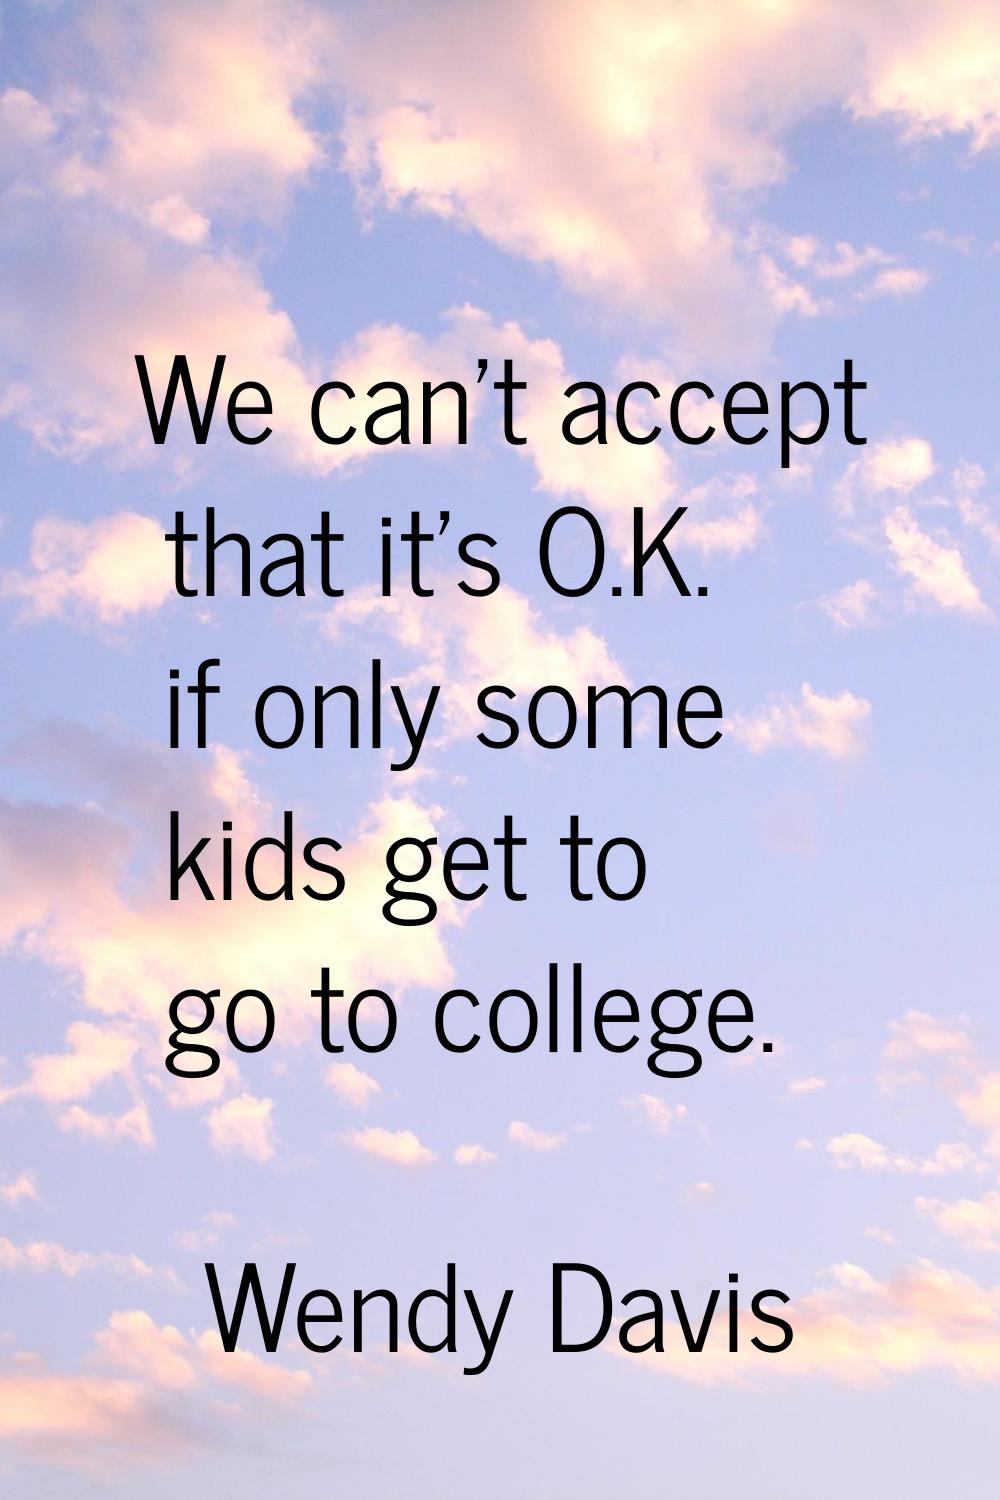 We can't accept that it's O.K. if only some kids get to go to college.